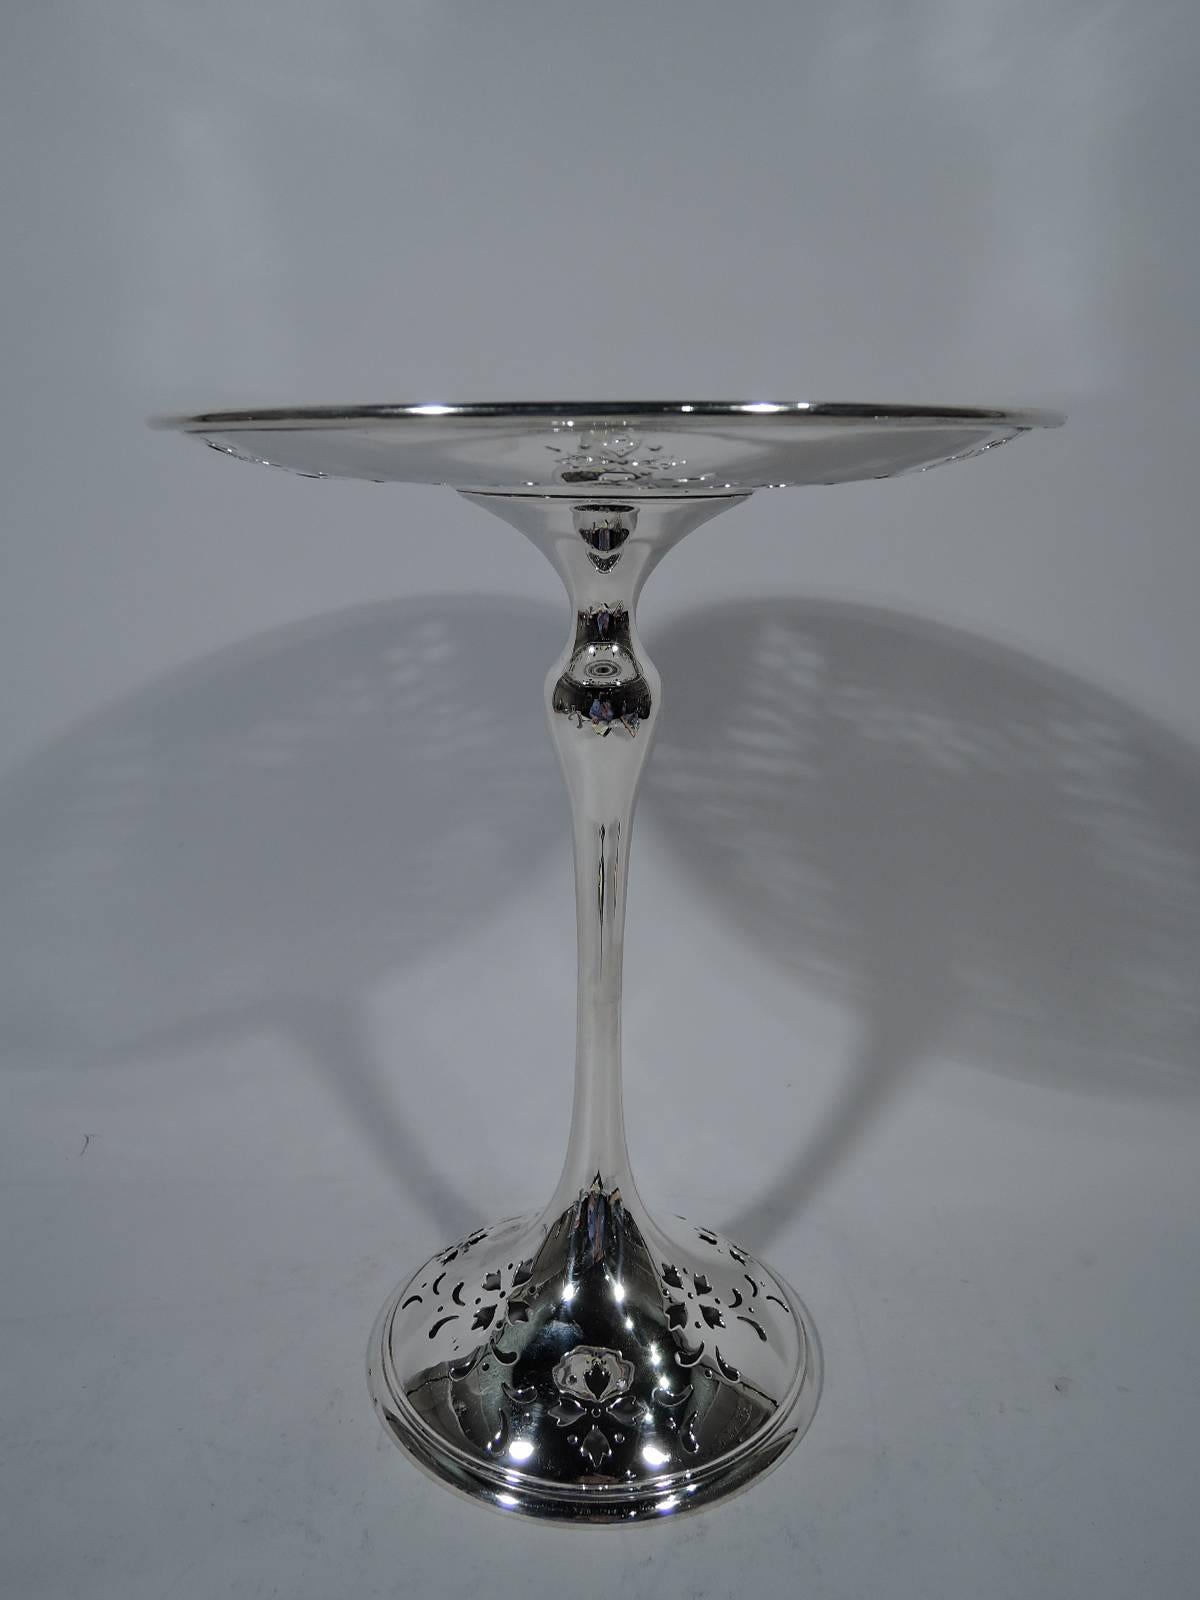 Tall Edwardian sterling silver compote. Made by Shreve & Co. in San Francisco, circa 1920. Shallow bowl with plain and inset well surrounded by wide rim. Slender baluster shaft and domed foot. Pierced and stylized garlands on bowl and foot.